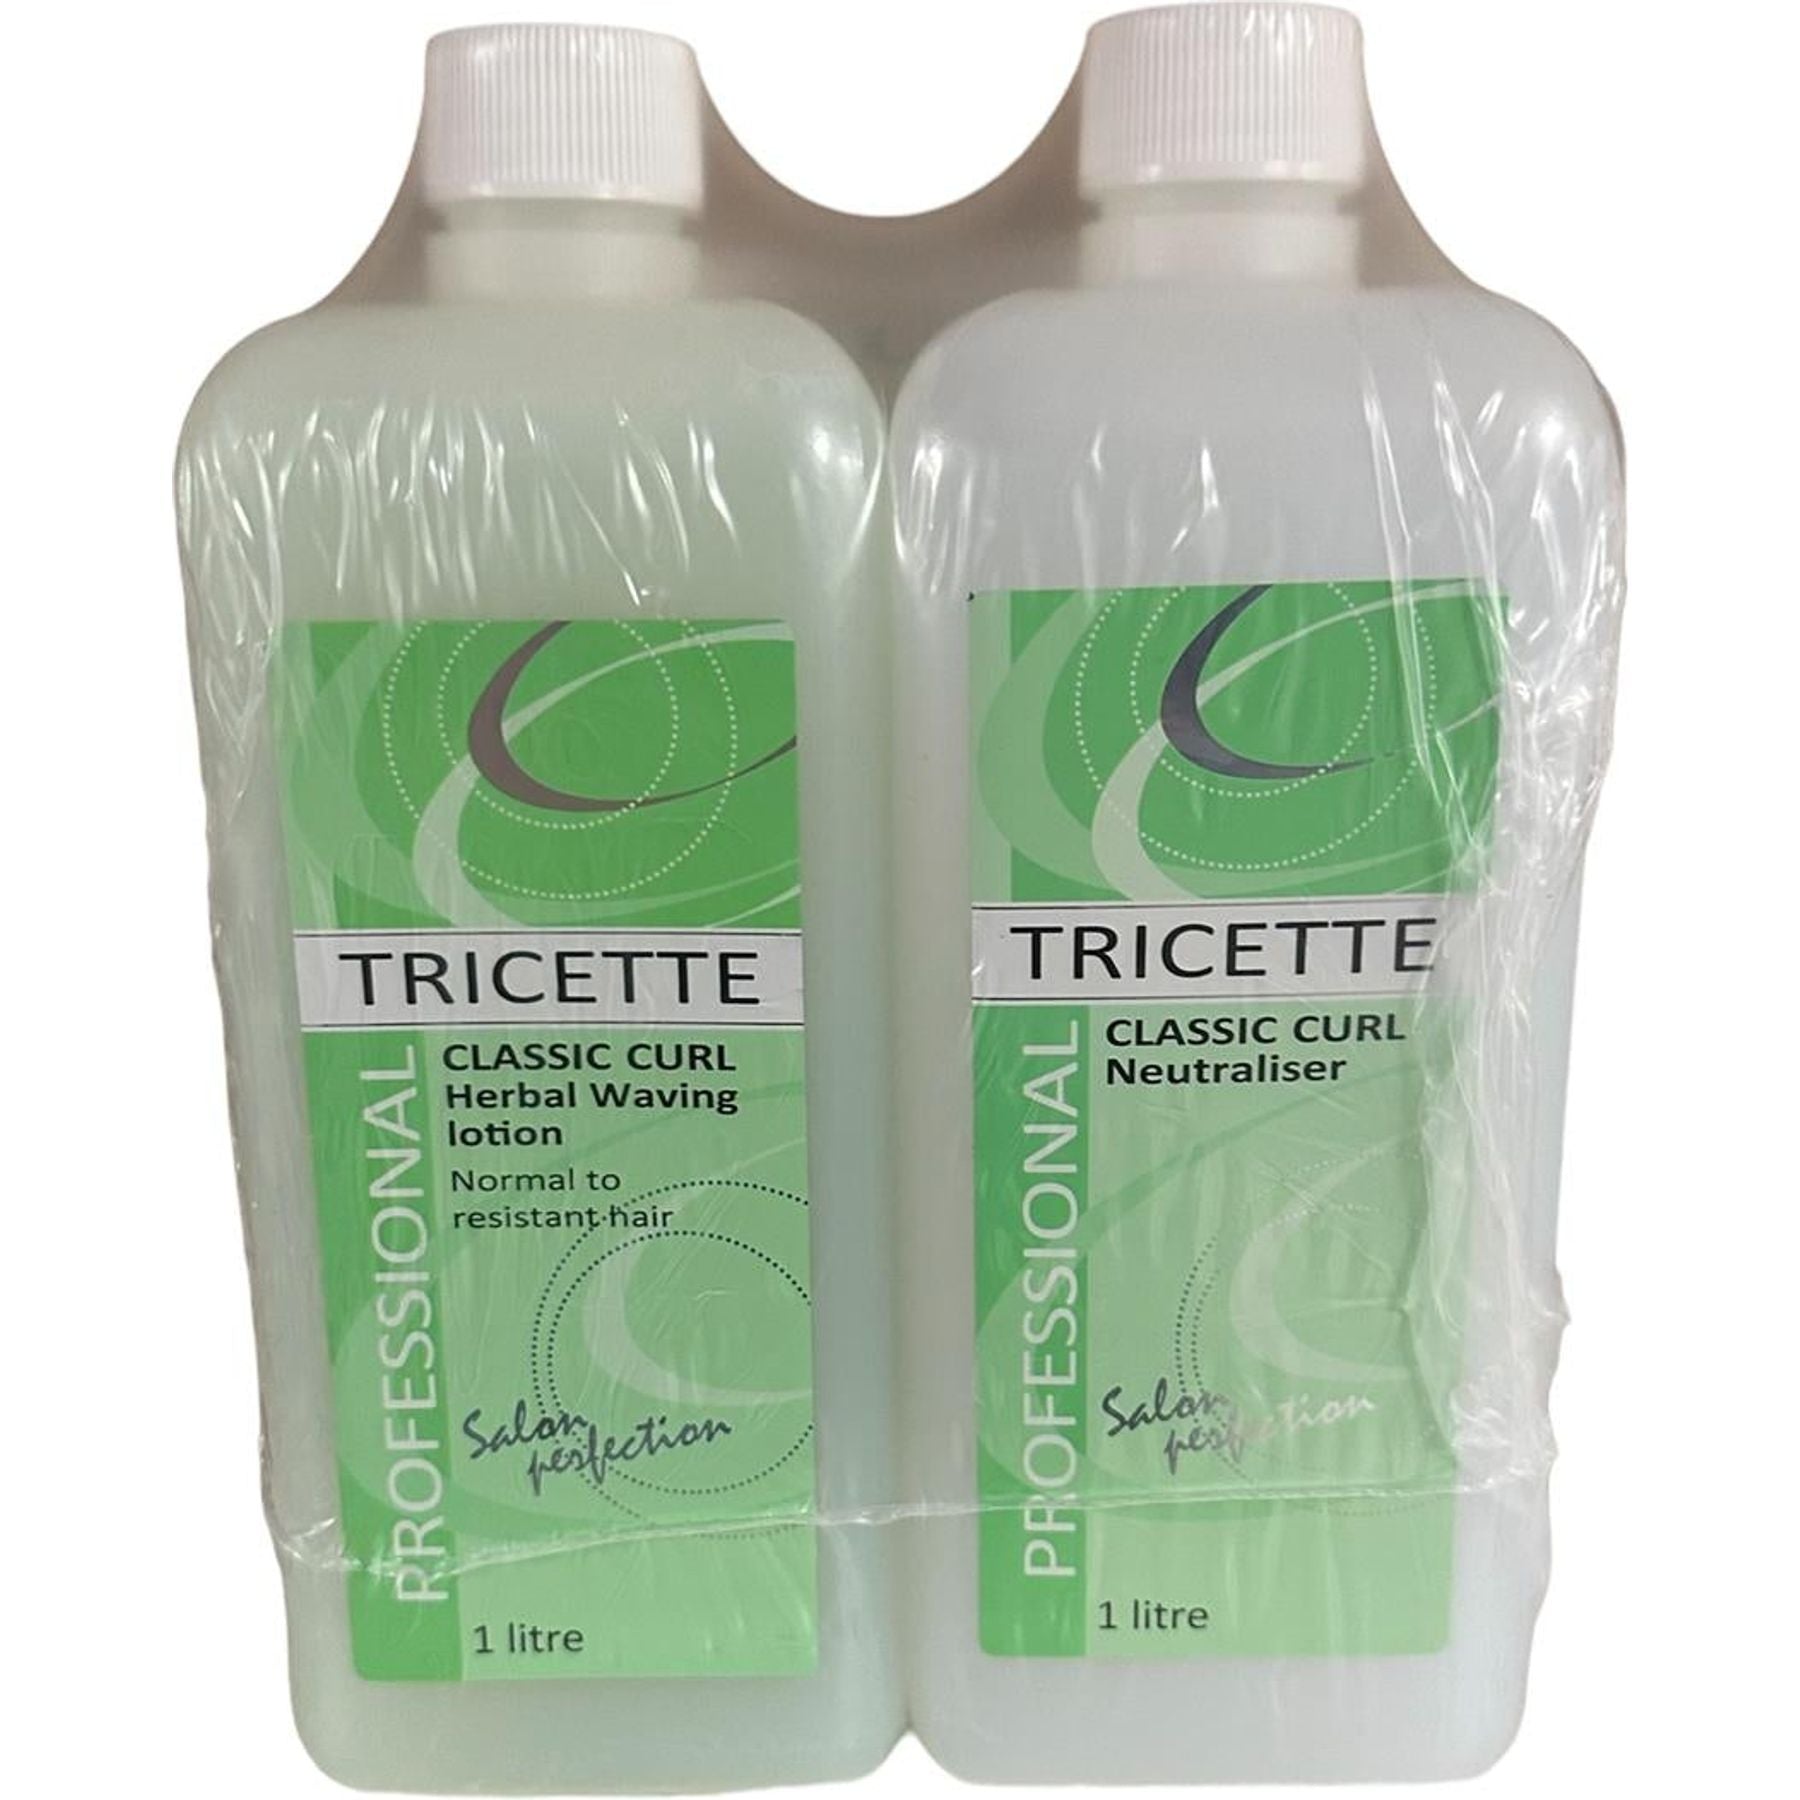 Tricette Herbal Perm Twin Pack 1L 1